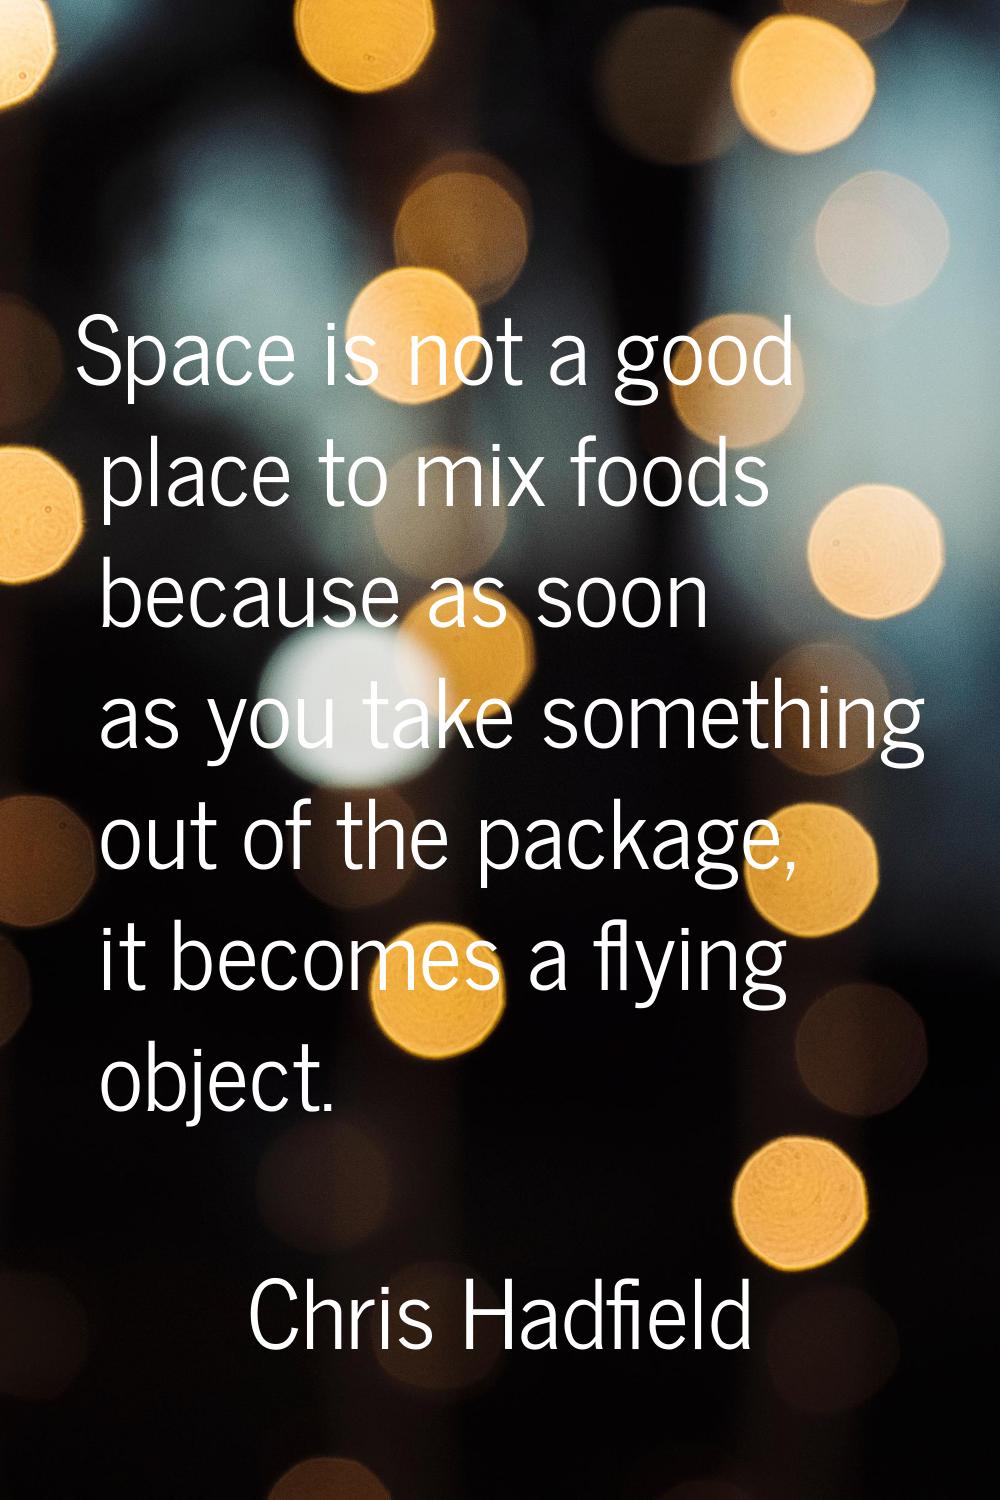 Space is not a good place to mix foods because as soon as you take something out of the package, it